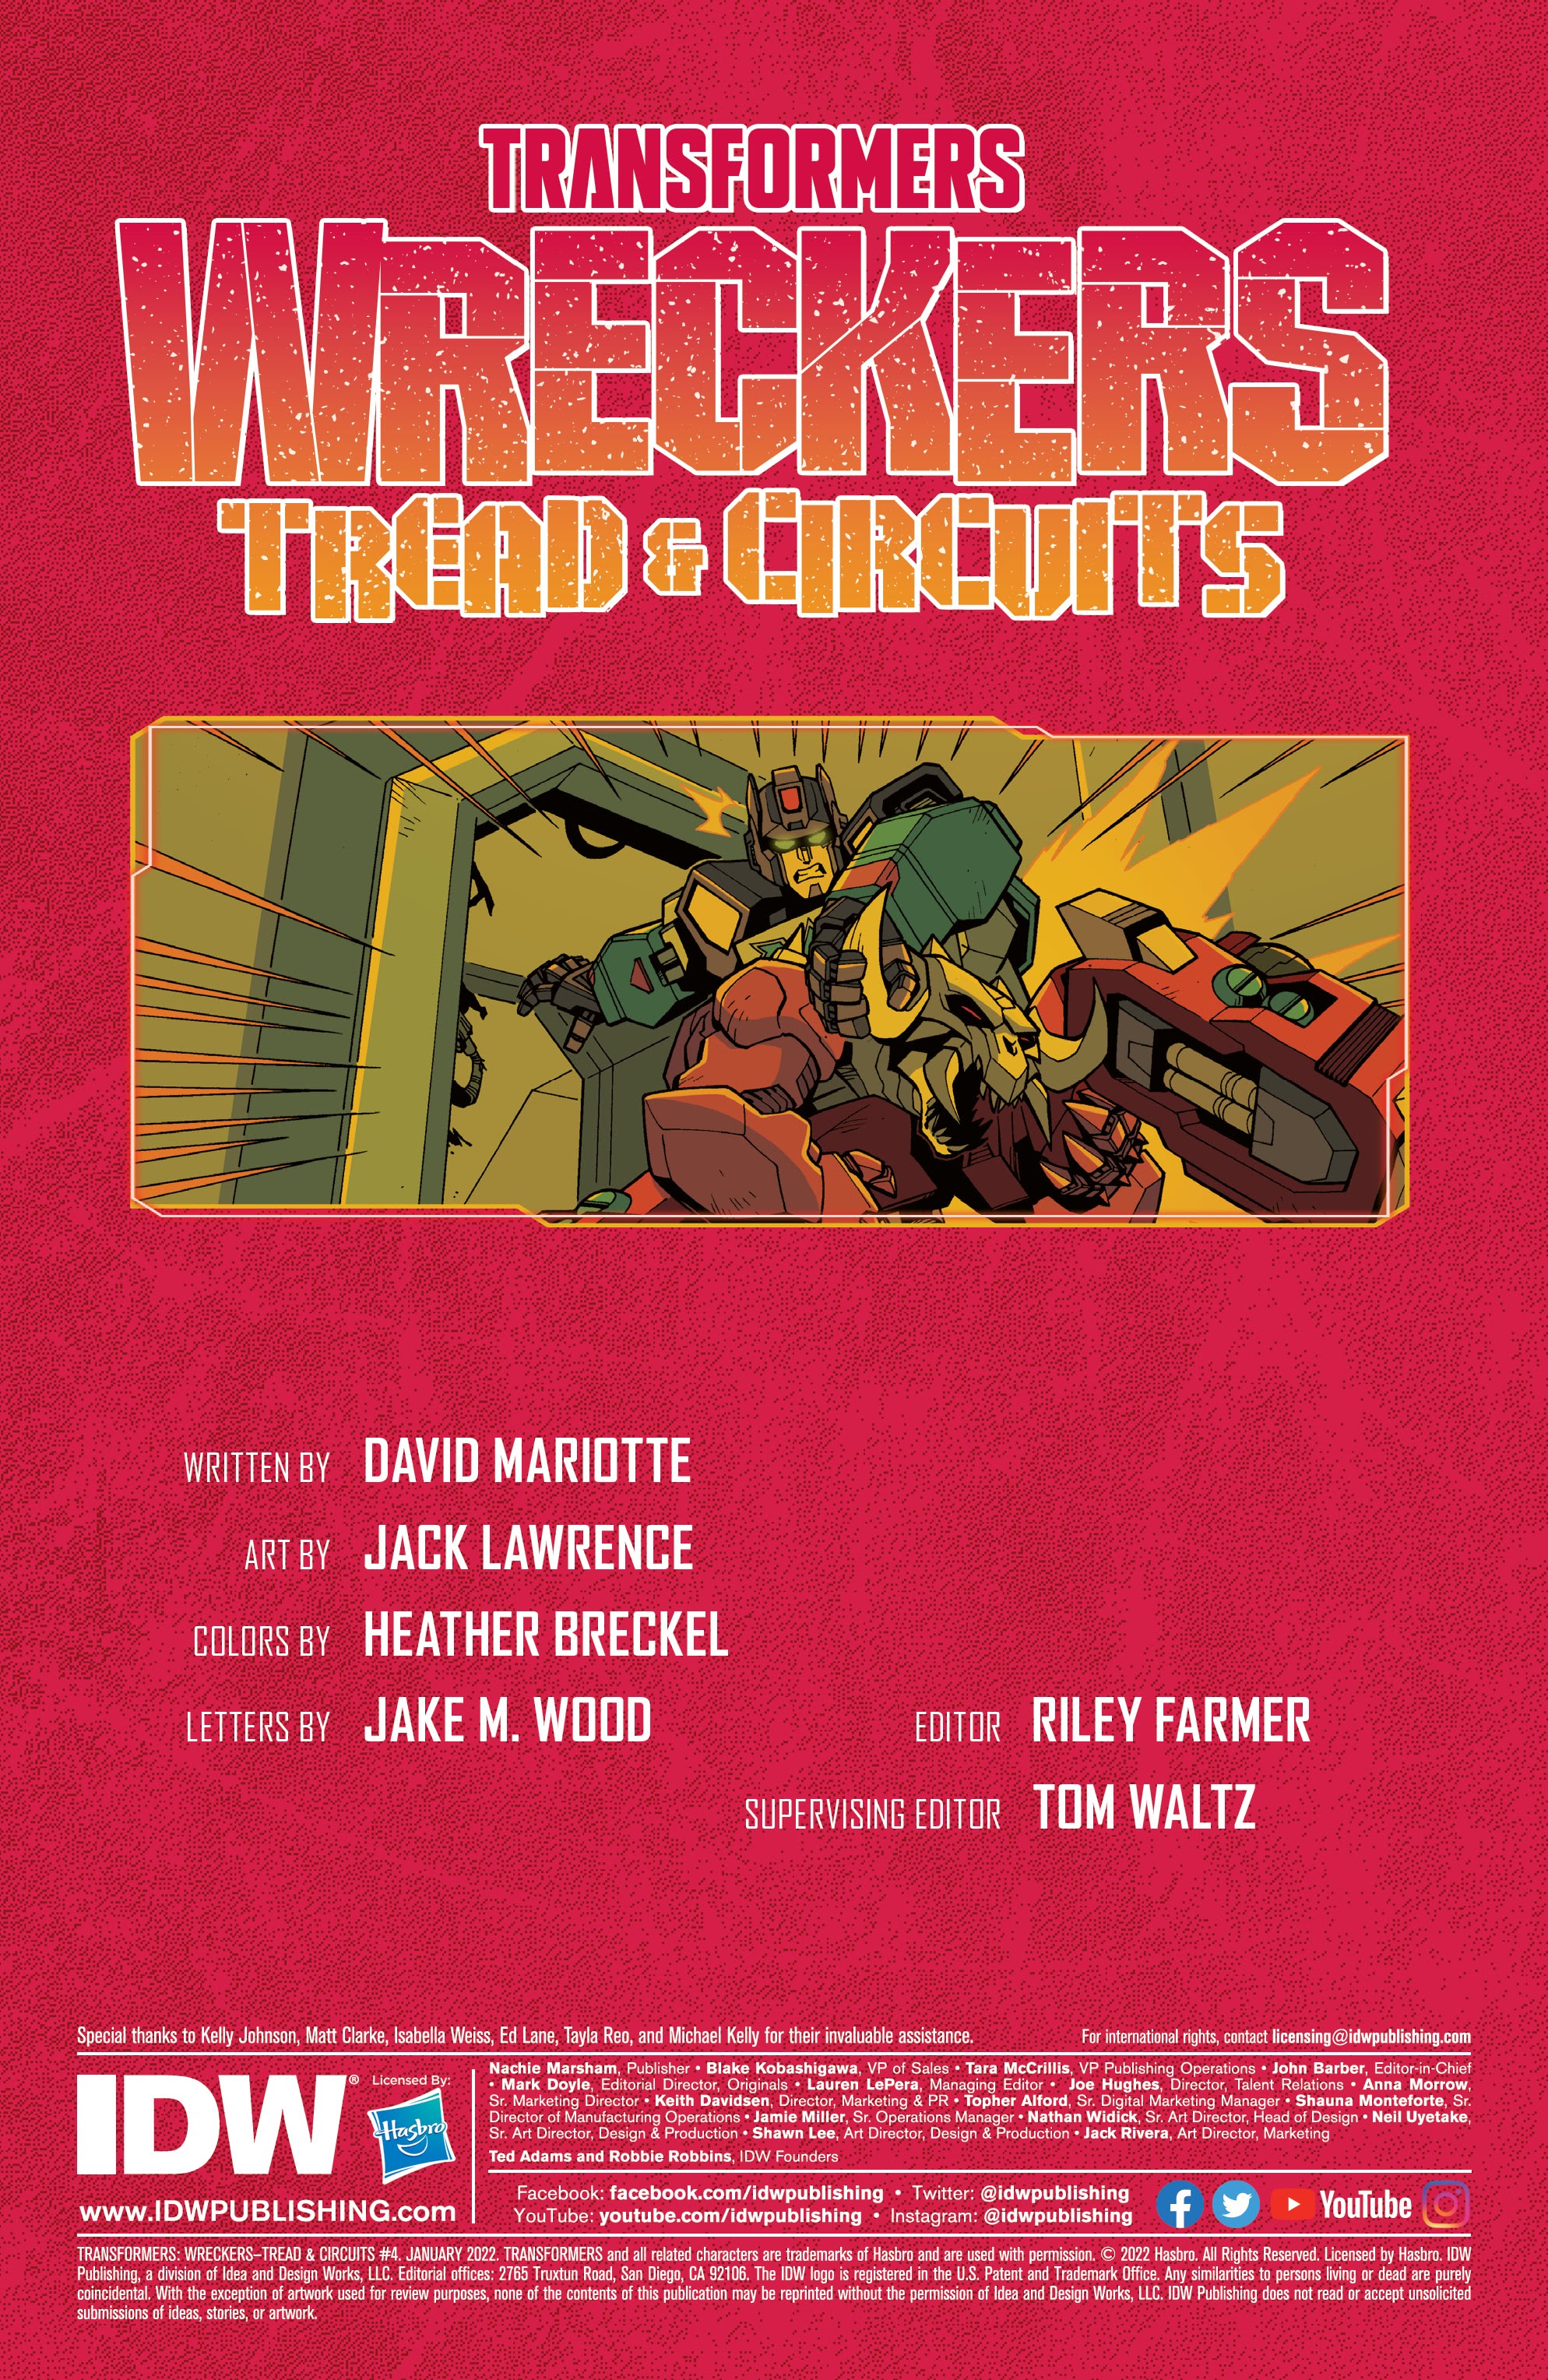 Read online Transformers: Wreckers-Tread and Circuits comic -  Issue #4 - 2